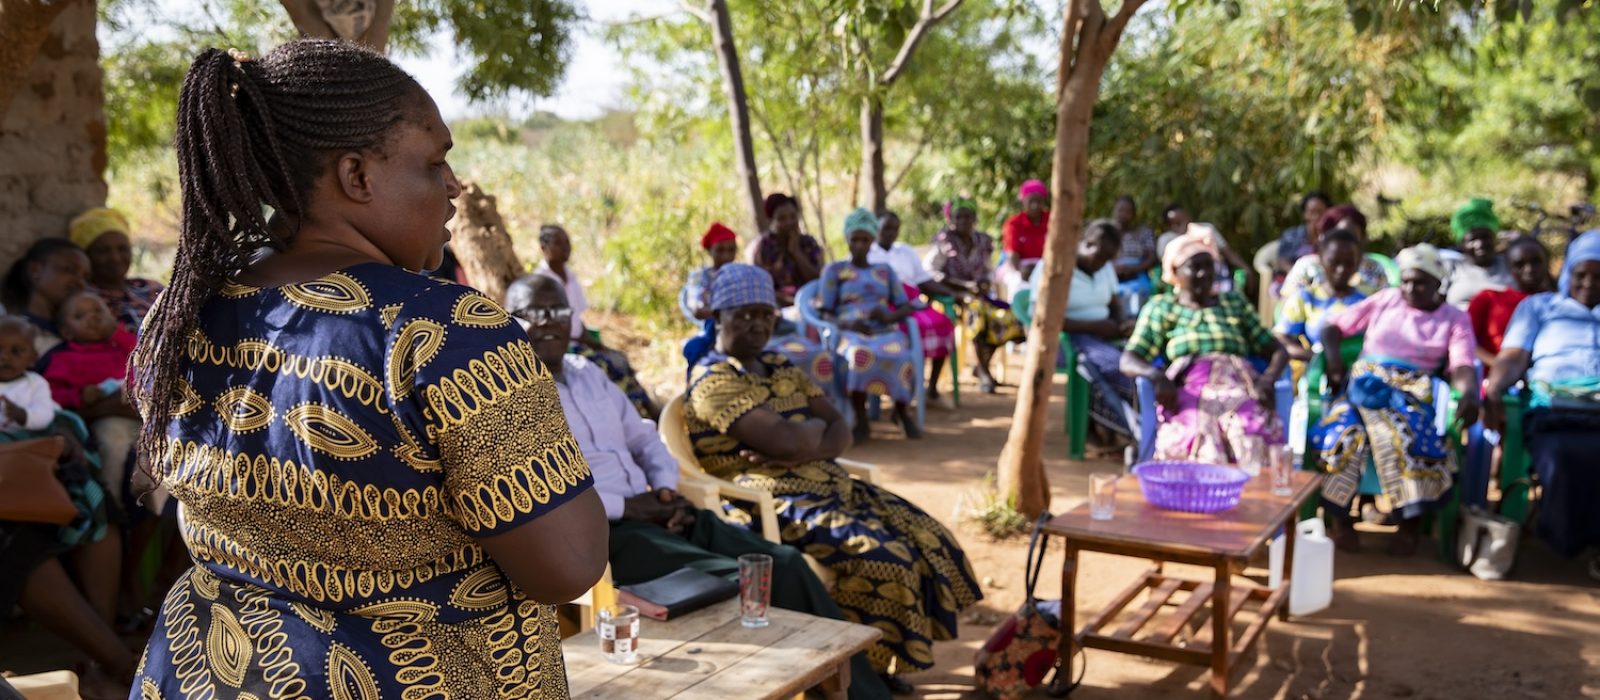 A member of the bible study group addresses the group at a women's bible study session in Makindu, Kenya, on 28 June 2023.

Tearfund partners with local churches and organisations in Kenya, like Fadhili Trust,  to reduce poverty.